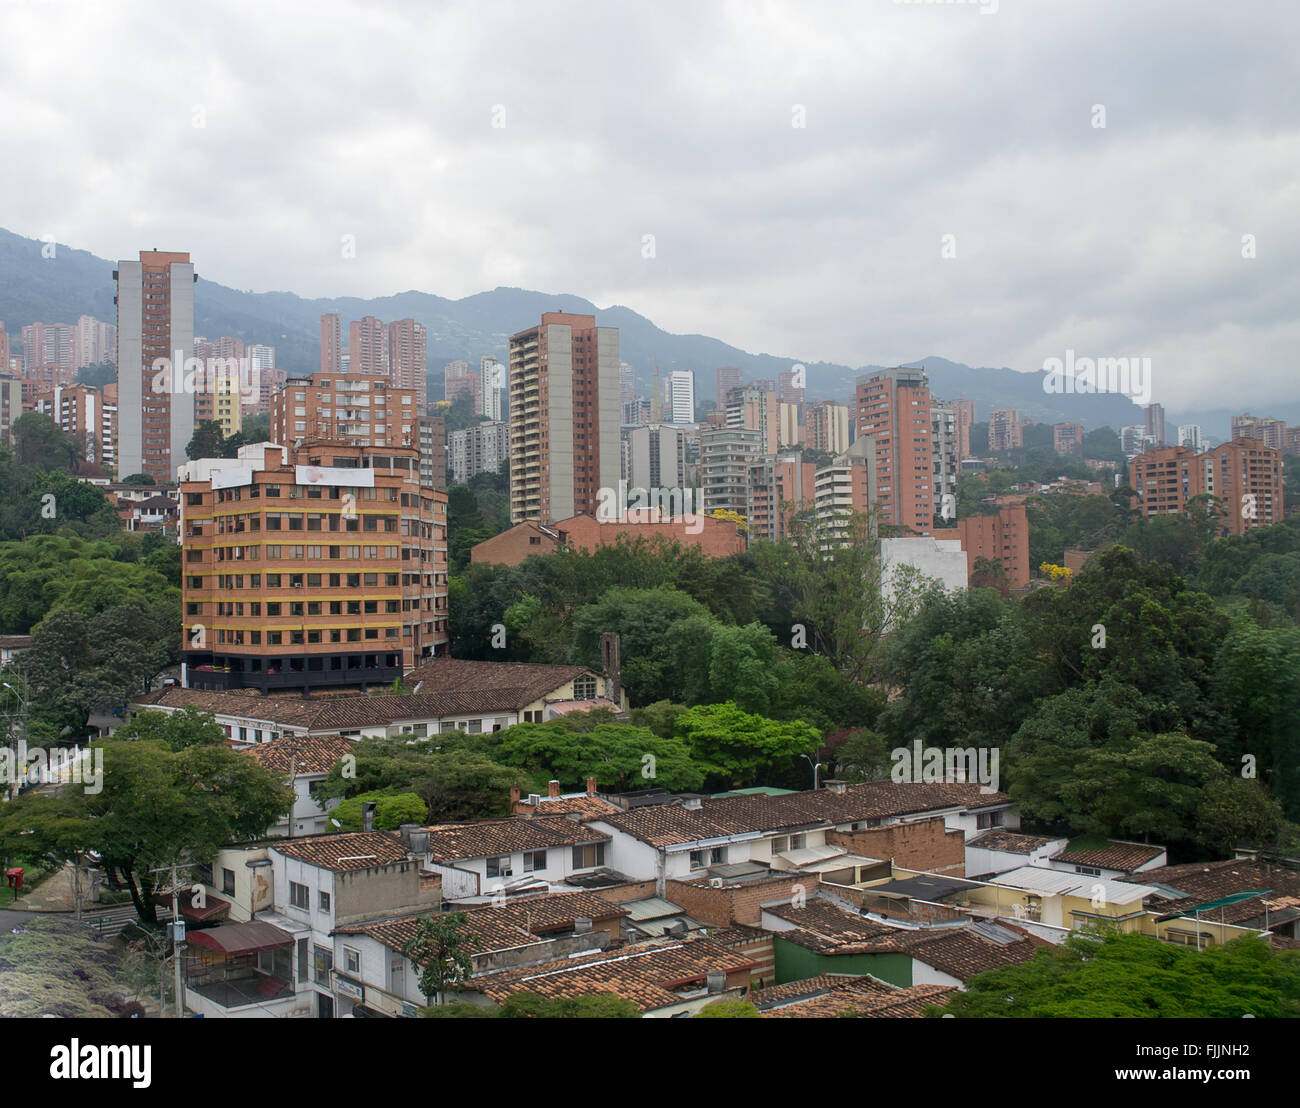 Spectacular panorama of modern South American city Medellin, Colombia Stock Photo